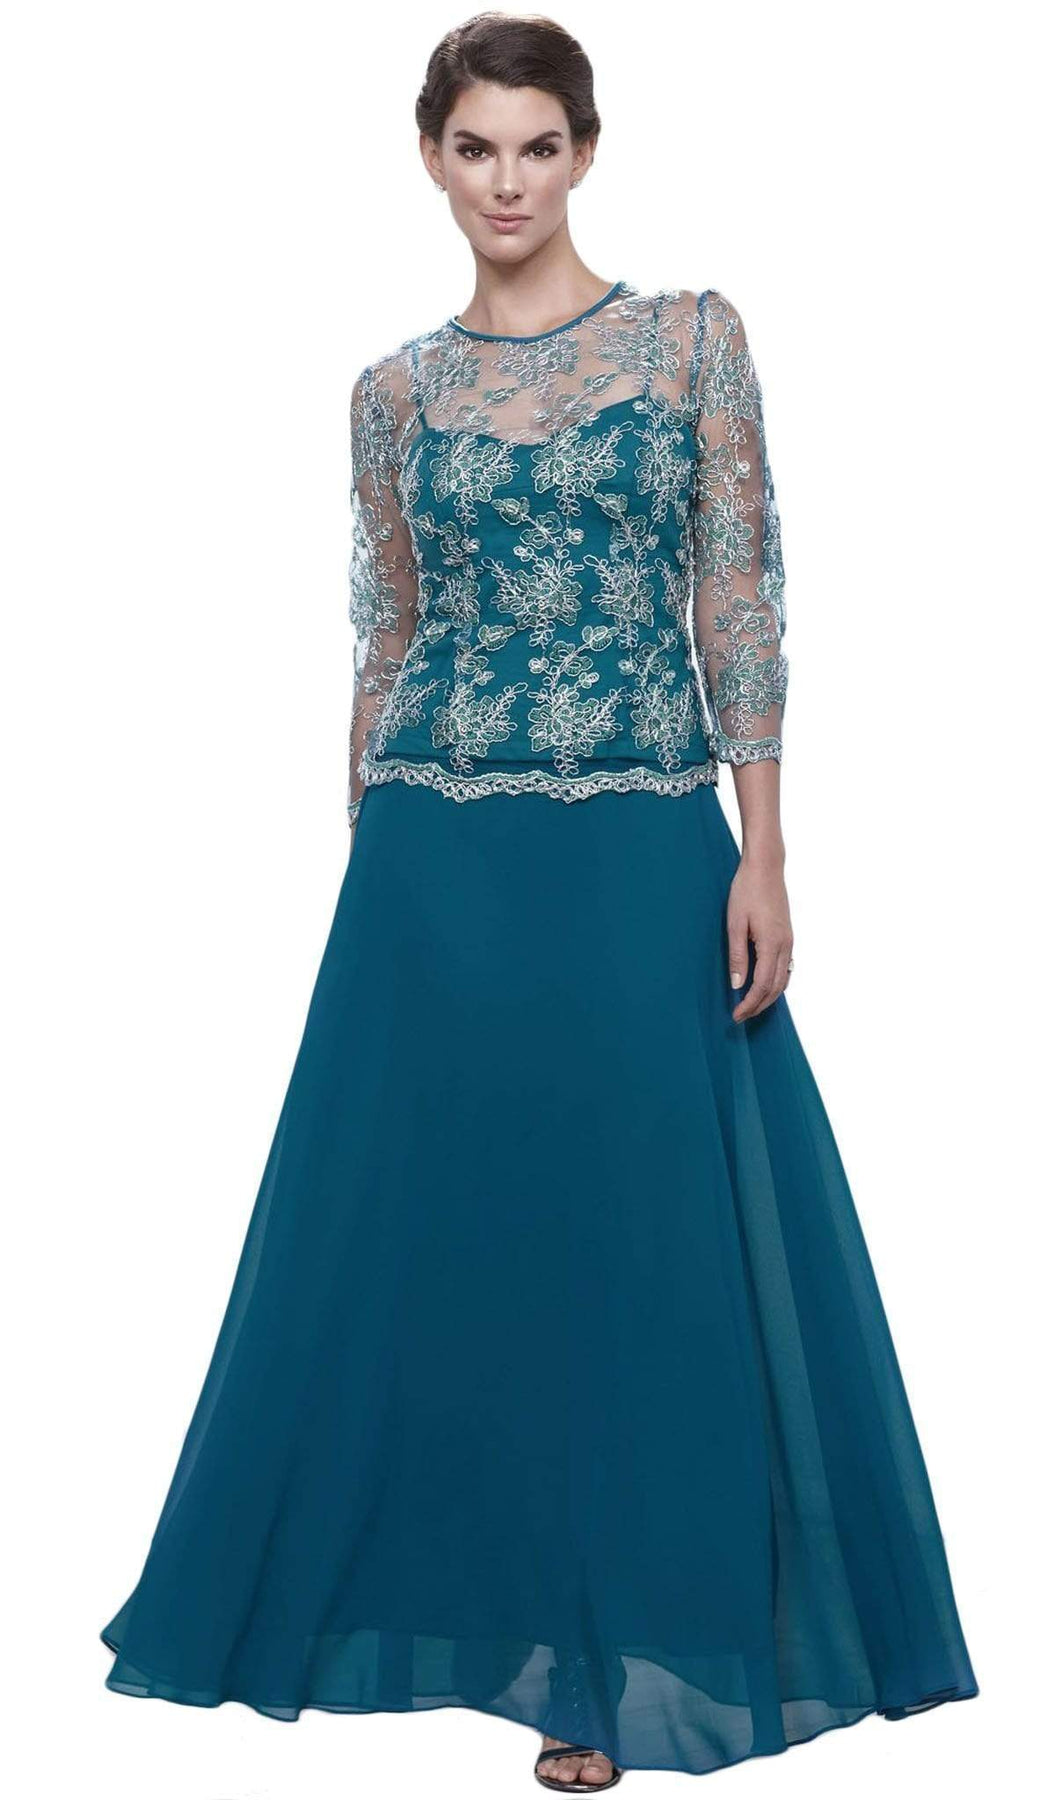 Nox Anabel - 5096 Sheer Lace Jewel Neck A-line Long Formal Dress Mother of the Bride Dresses M / Teal